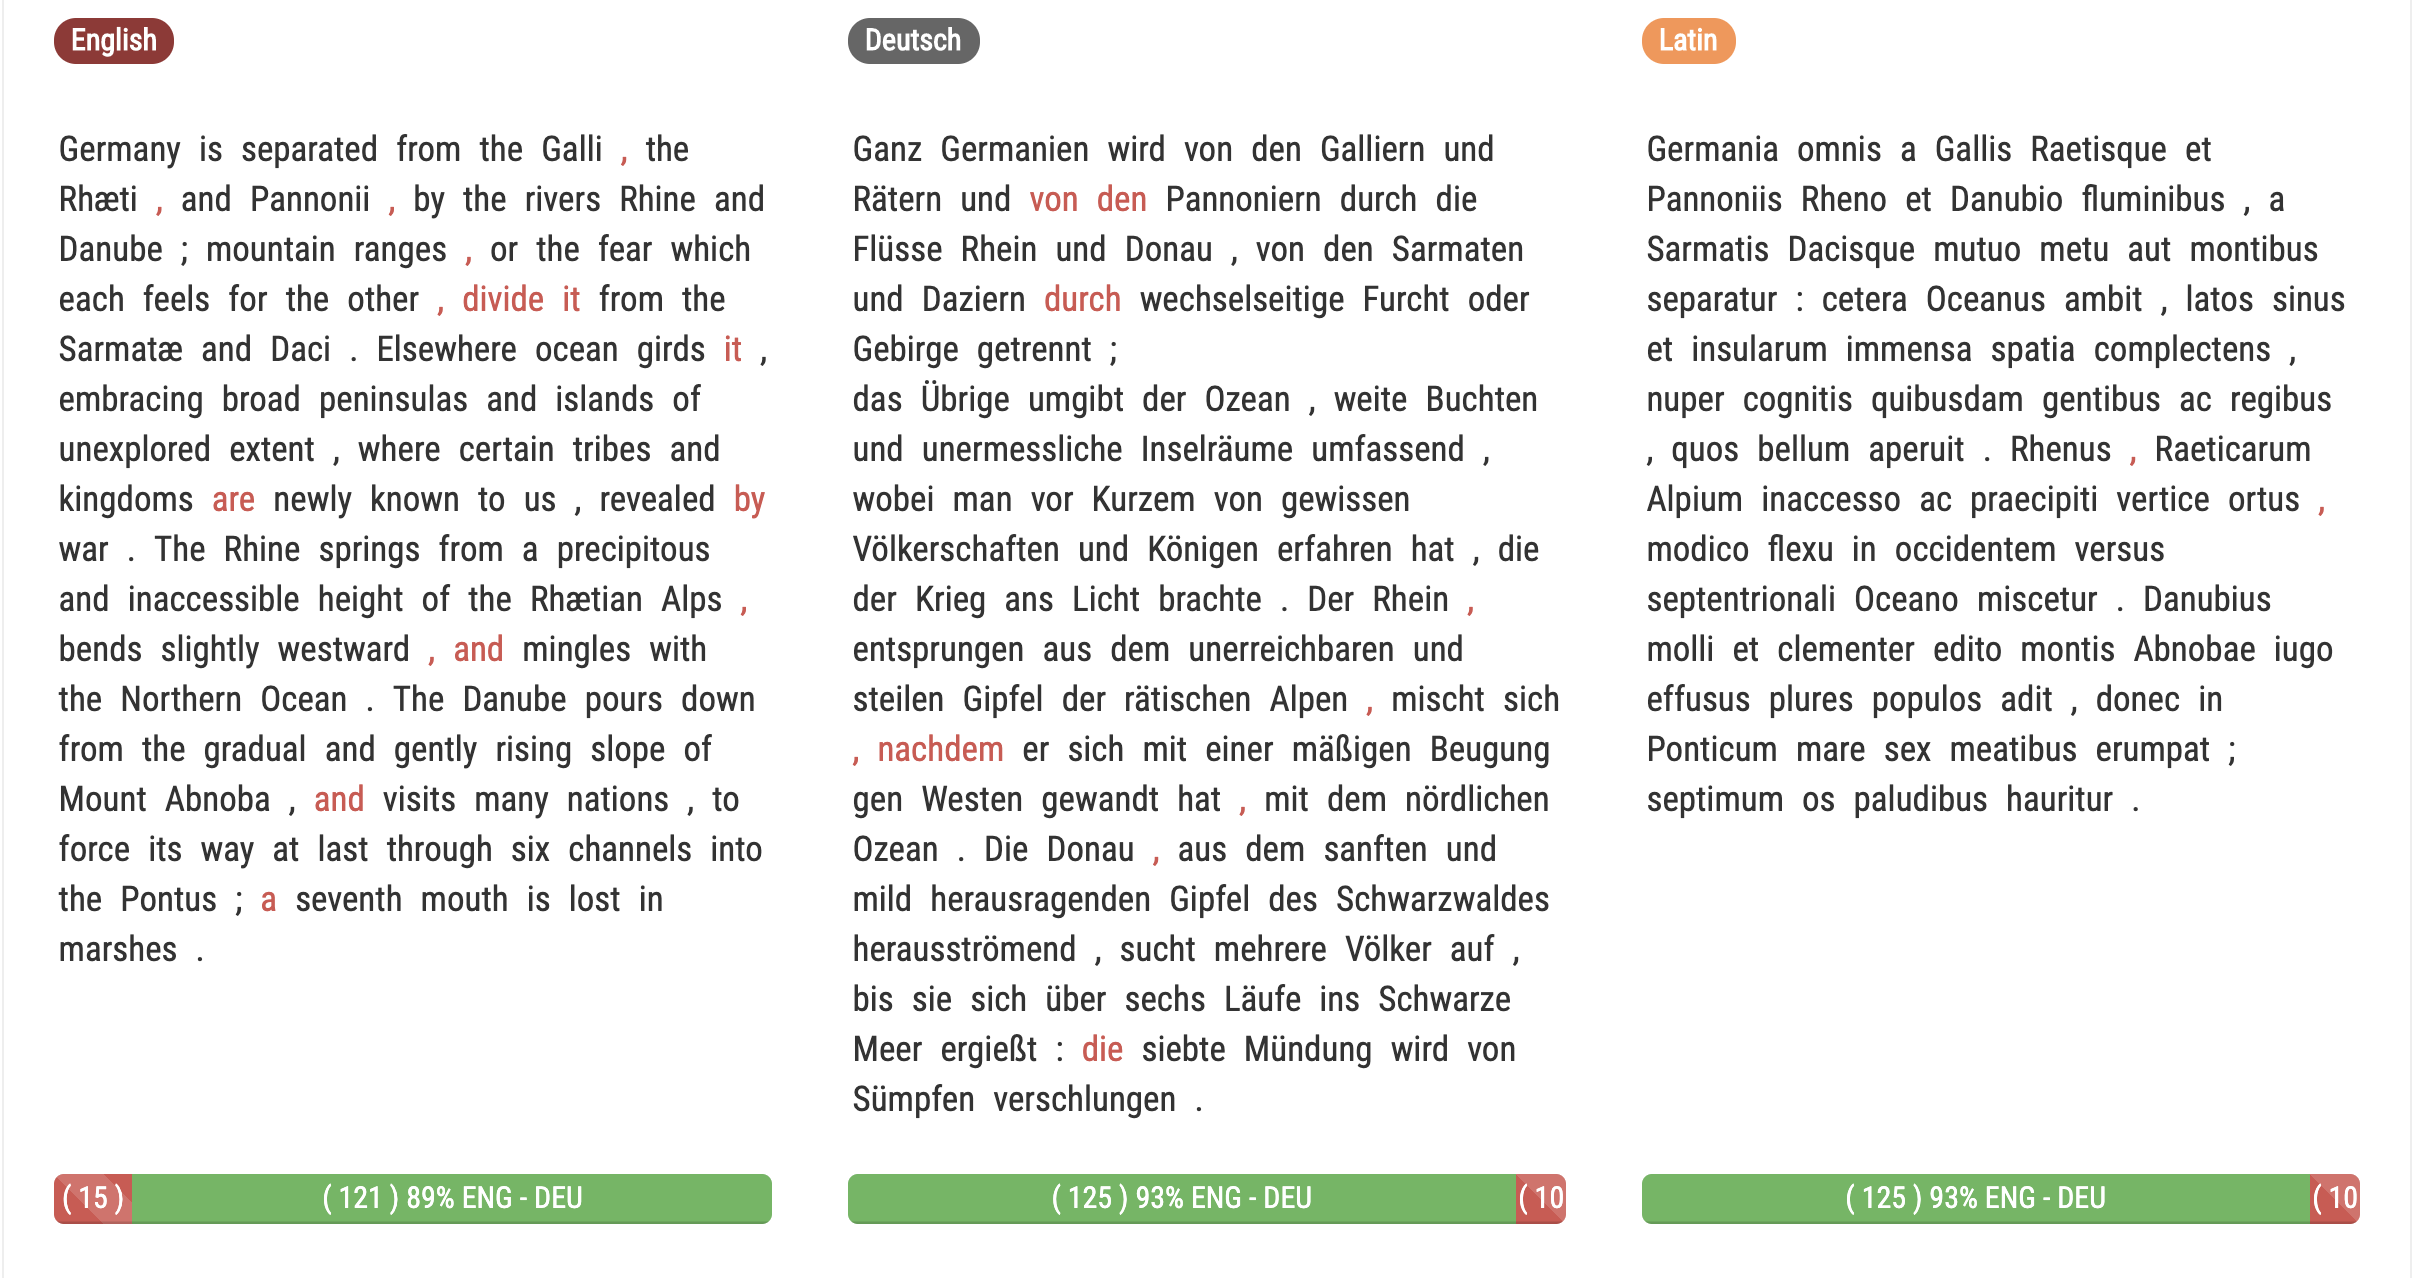 Sample passage of Tacitus, Germania 1.1, with two aligned translations in English and German, located on the left and at the center respectively. The German translation at the center displays identical matching rate as the Latin text on the right (93%), while the English translation on the left only has 89% matching rate.